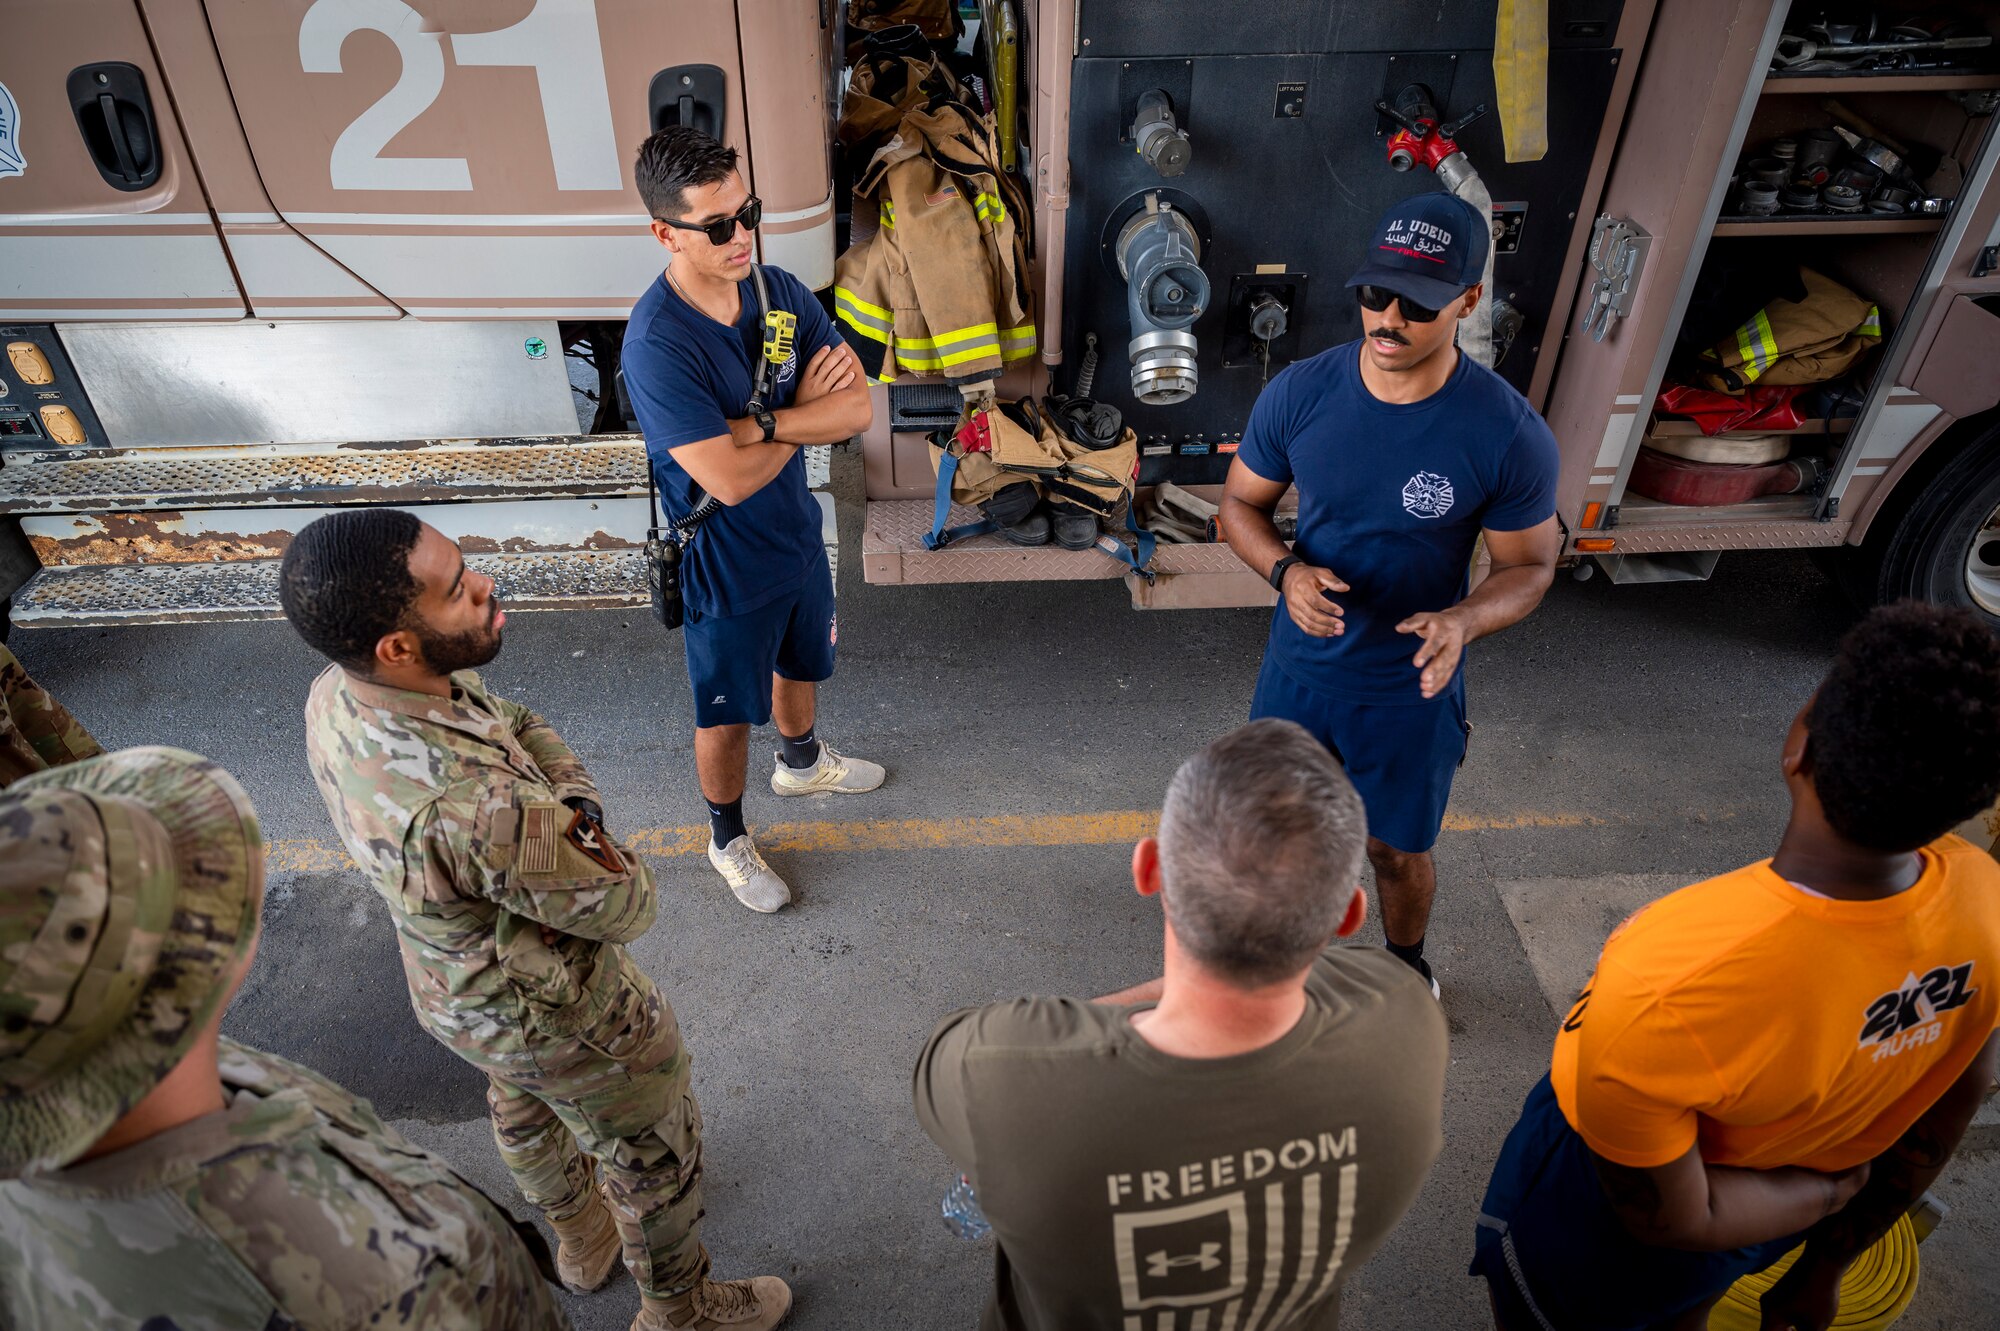 U.S. Air Force Airman 1st Class William Shaw, right, 379th Expeditionary Civil Engineer Squadron firefighter, explains the various components of a firetruck to Airmen at Al Udeid Air Base, Qatar, Nov. 27, 2021.